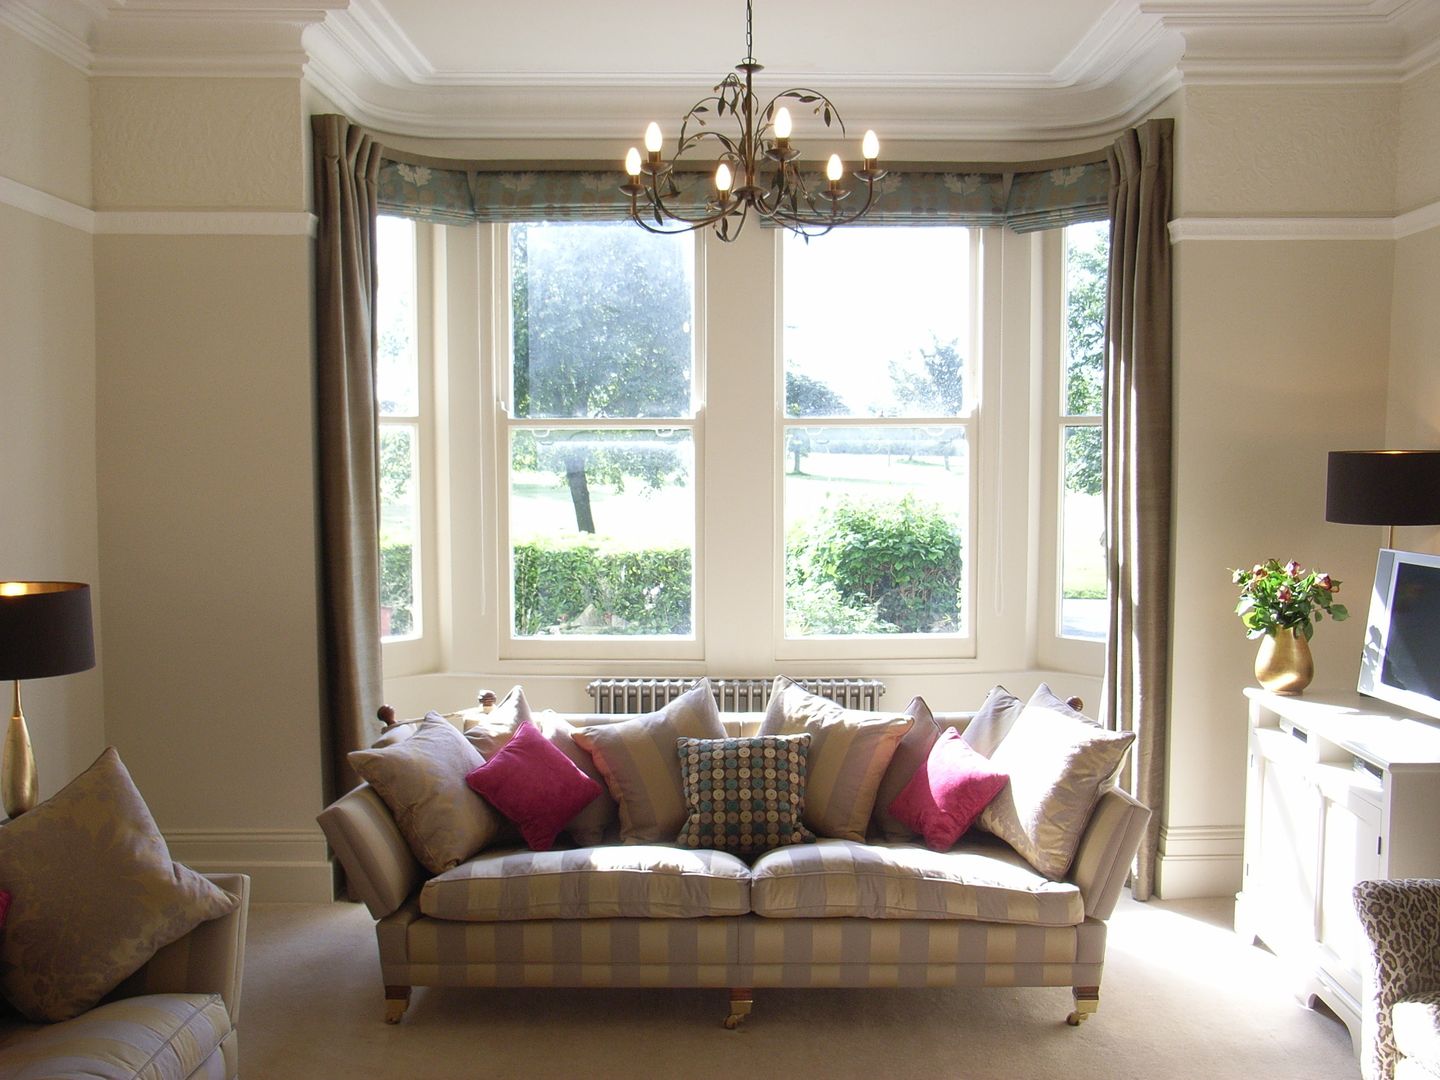 Classic View of Contemporised Victorian Living Room homify Living room large bay window,roman blinds,dress curtains,victorian home,victorian property,classic sofa,large sofa,taupe colour scheme,pink accents,living room decor,living room furnish